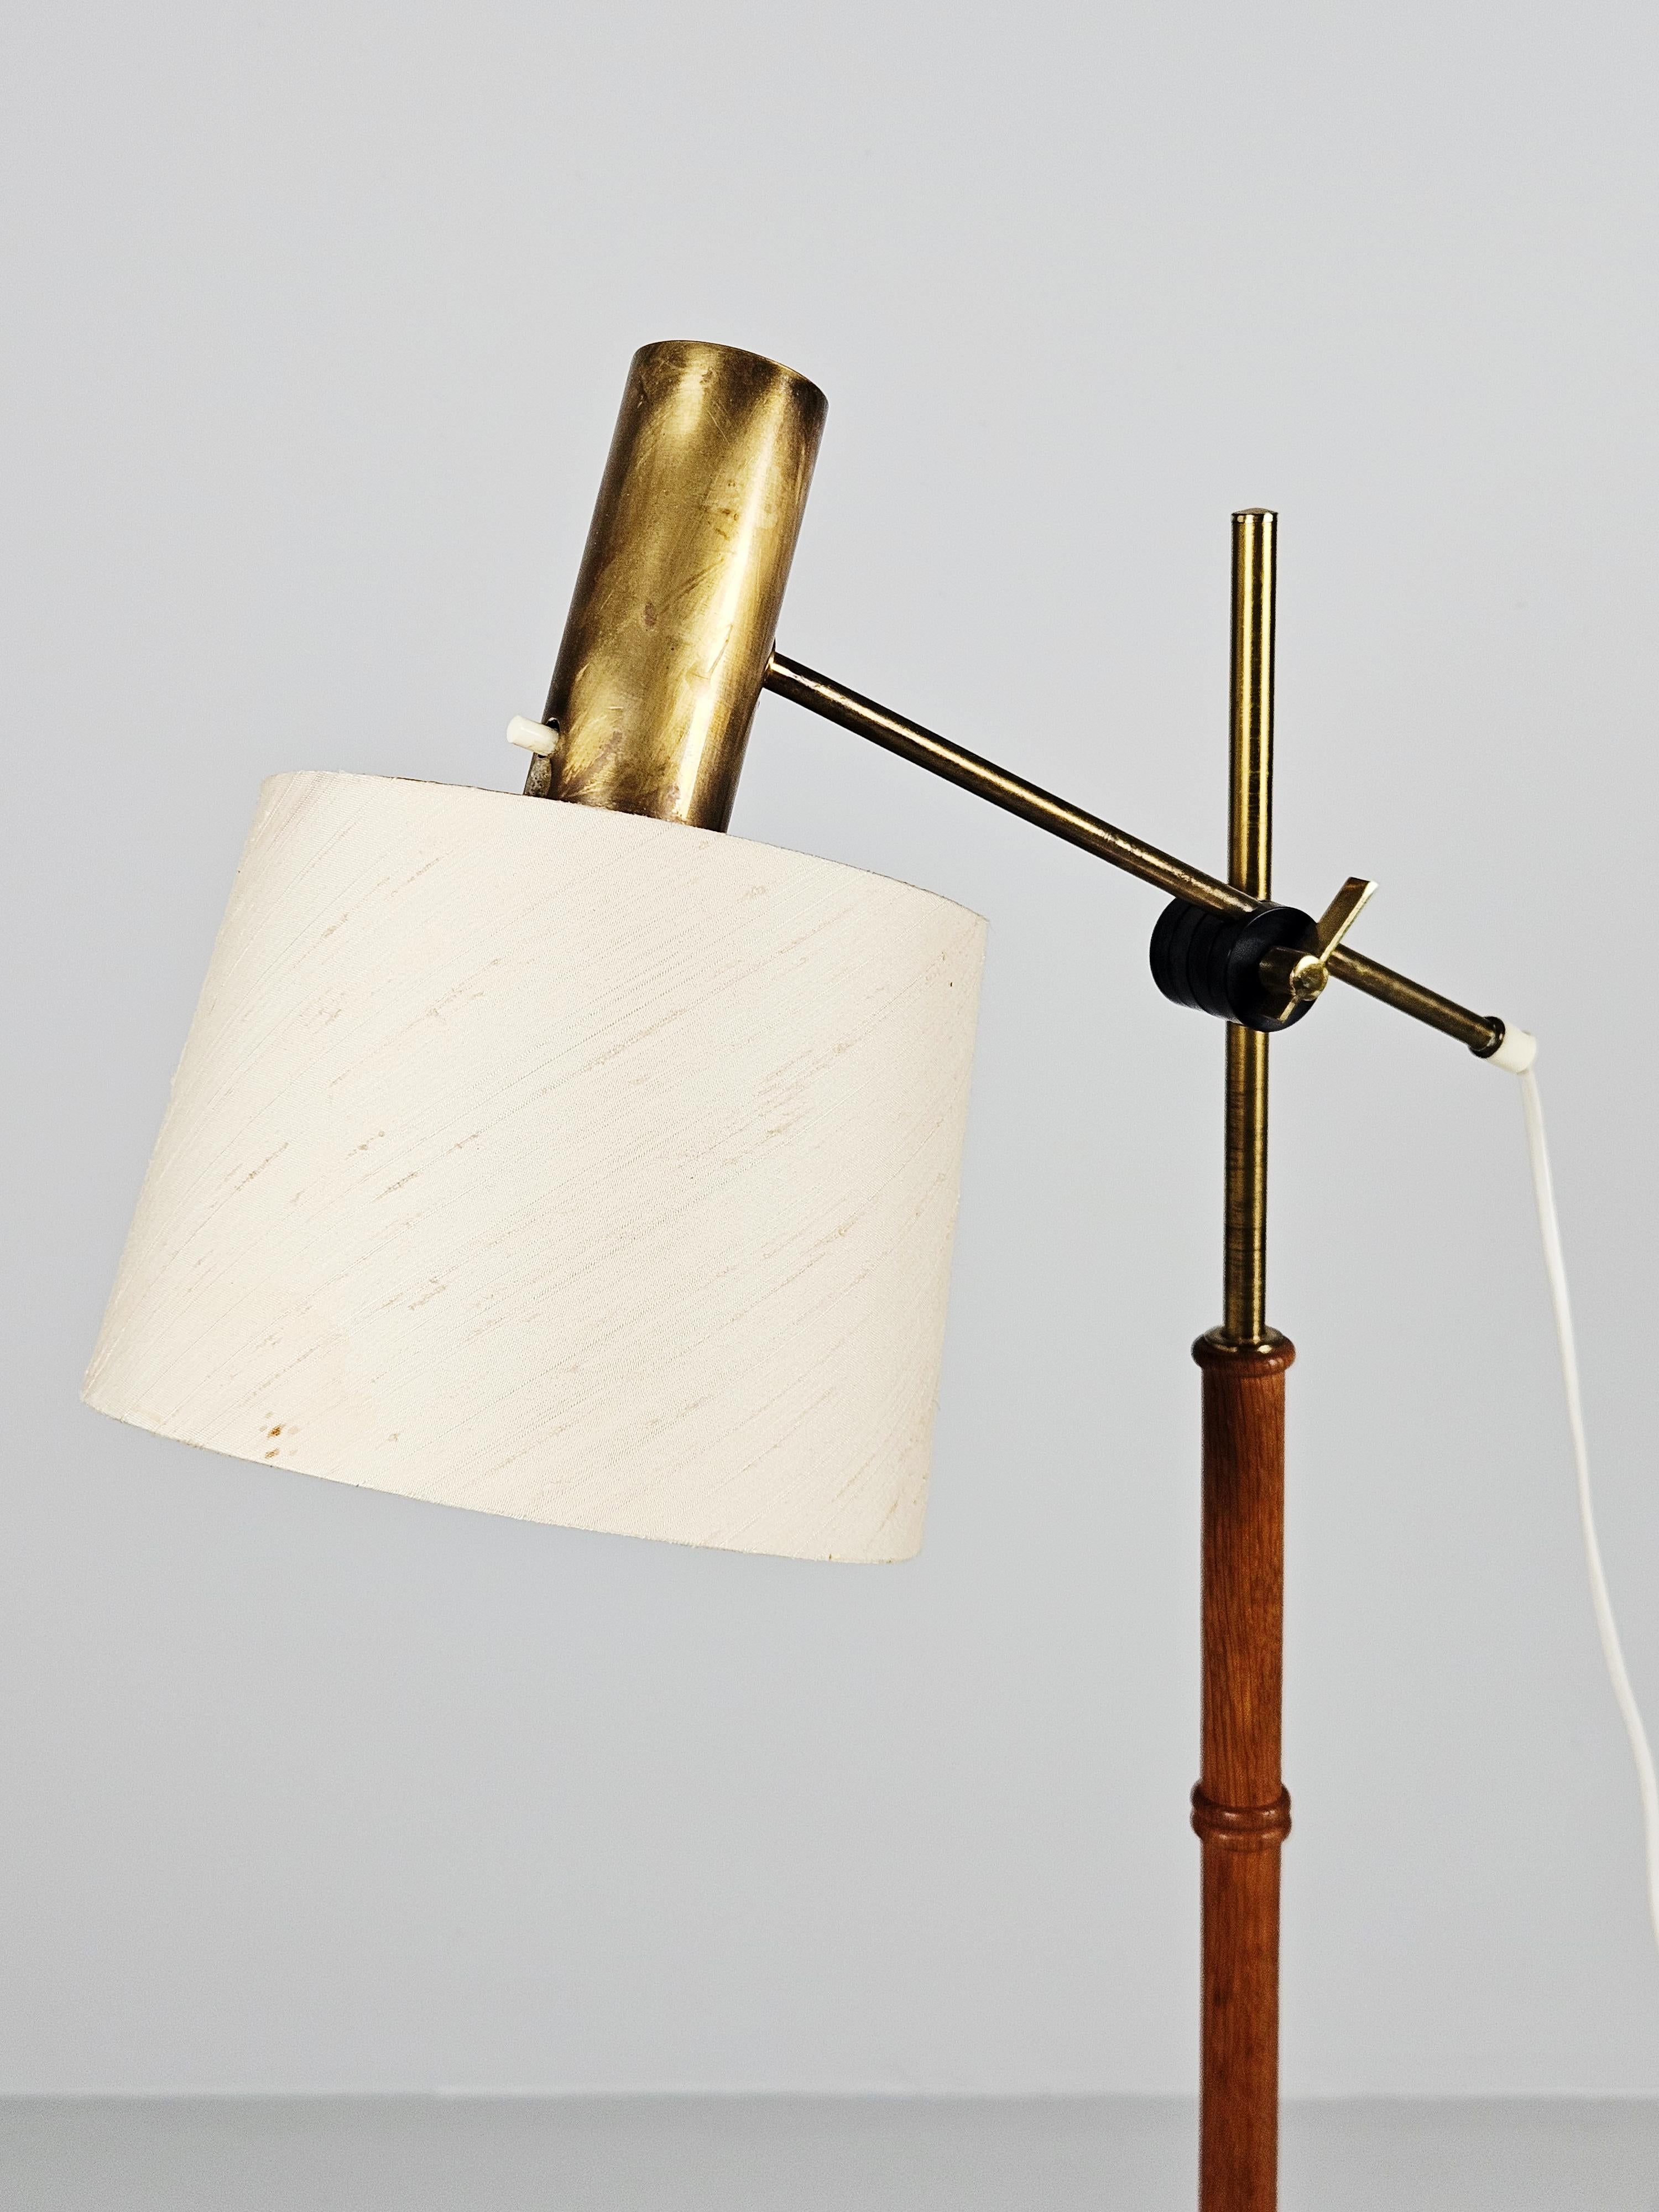 Beautiful floor lamp made by Falkenberg belysning in the 1960s.

Made in brass and teak with an adjustable arm. 

Great patina and comes with original lamp shade that has some stains on the fabric. 